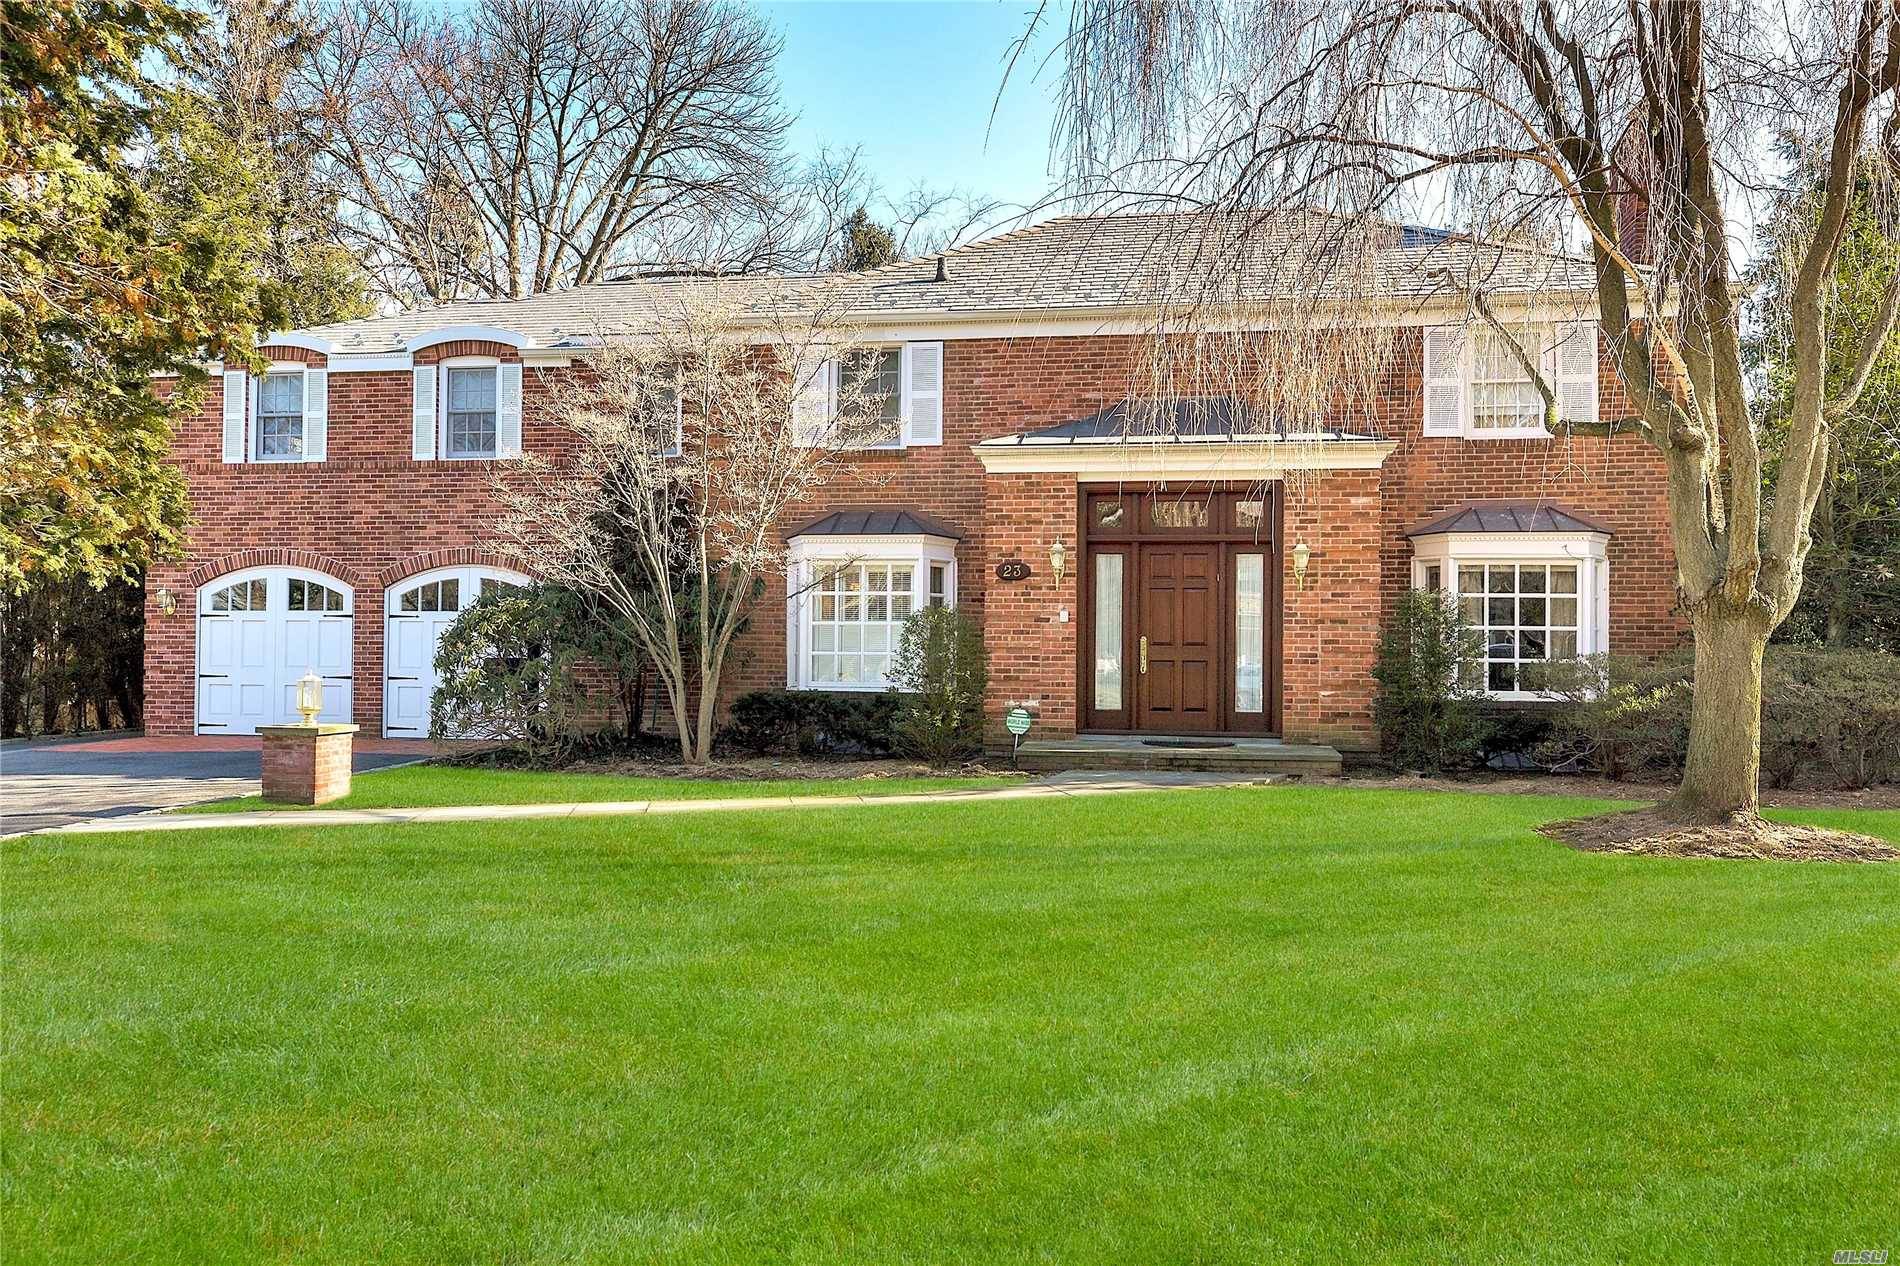 Welcome To This Stately Brick Colonial Home Situated On Approximately 1 3 Acre Of Park Like Property In The Heart Of Lake Success.